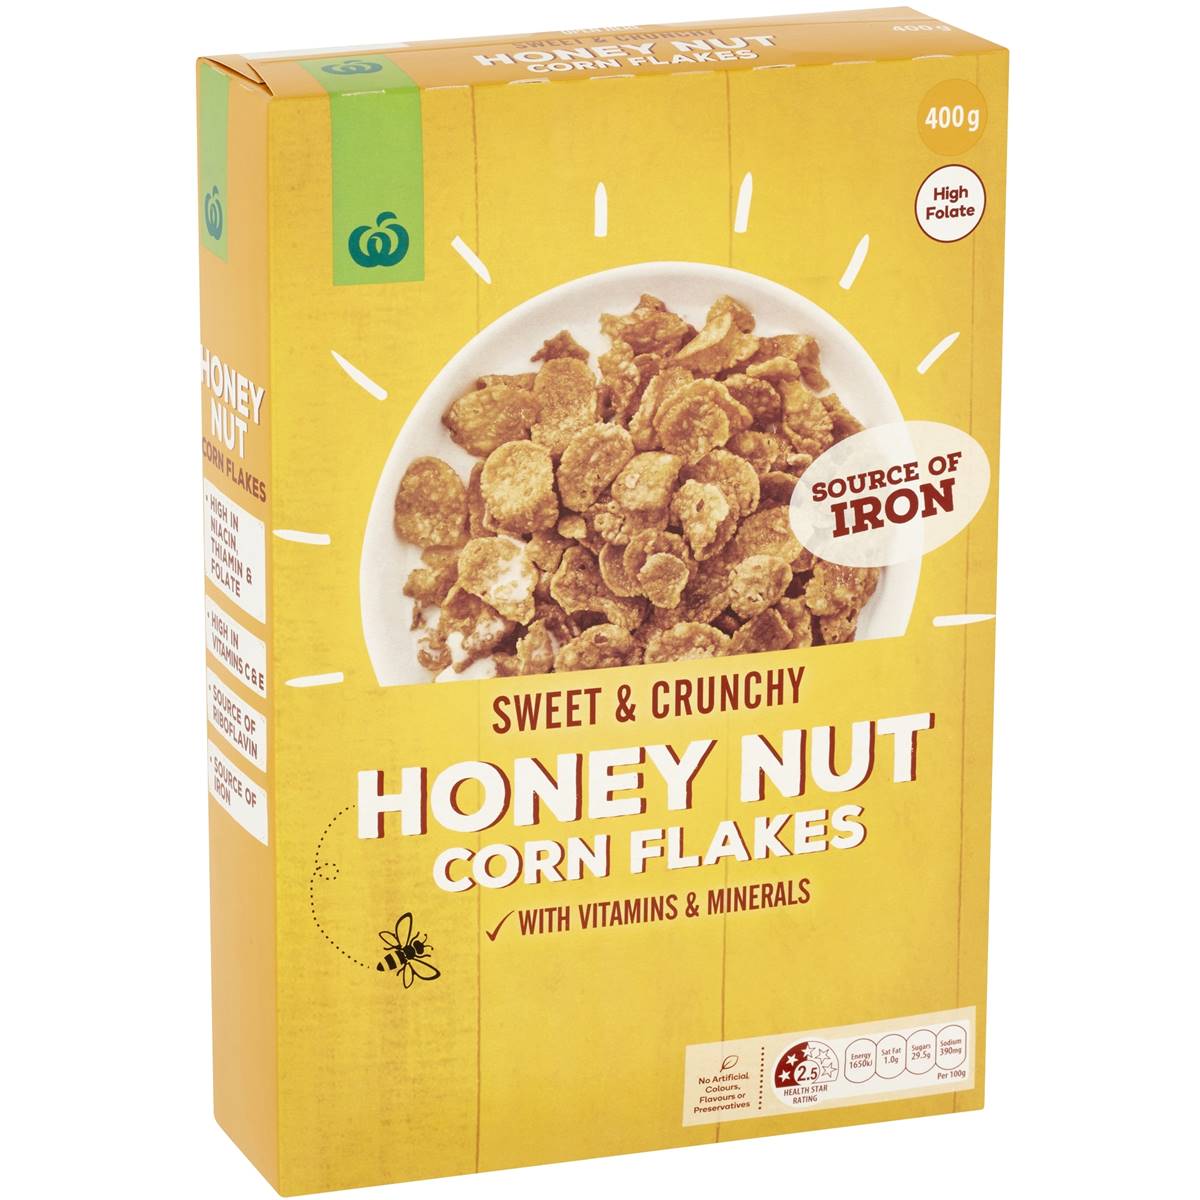 Calories in Woolworths Honey Nut Cornflakes